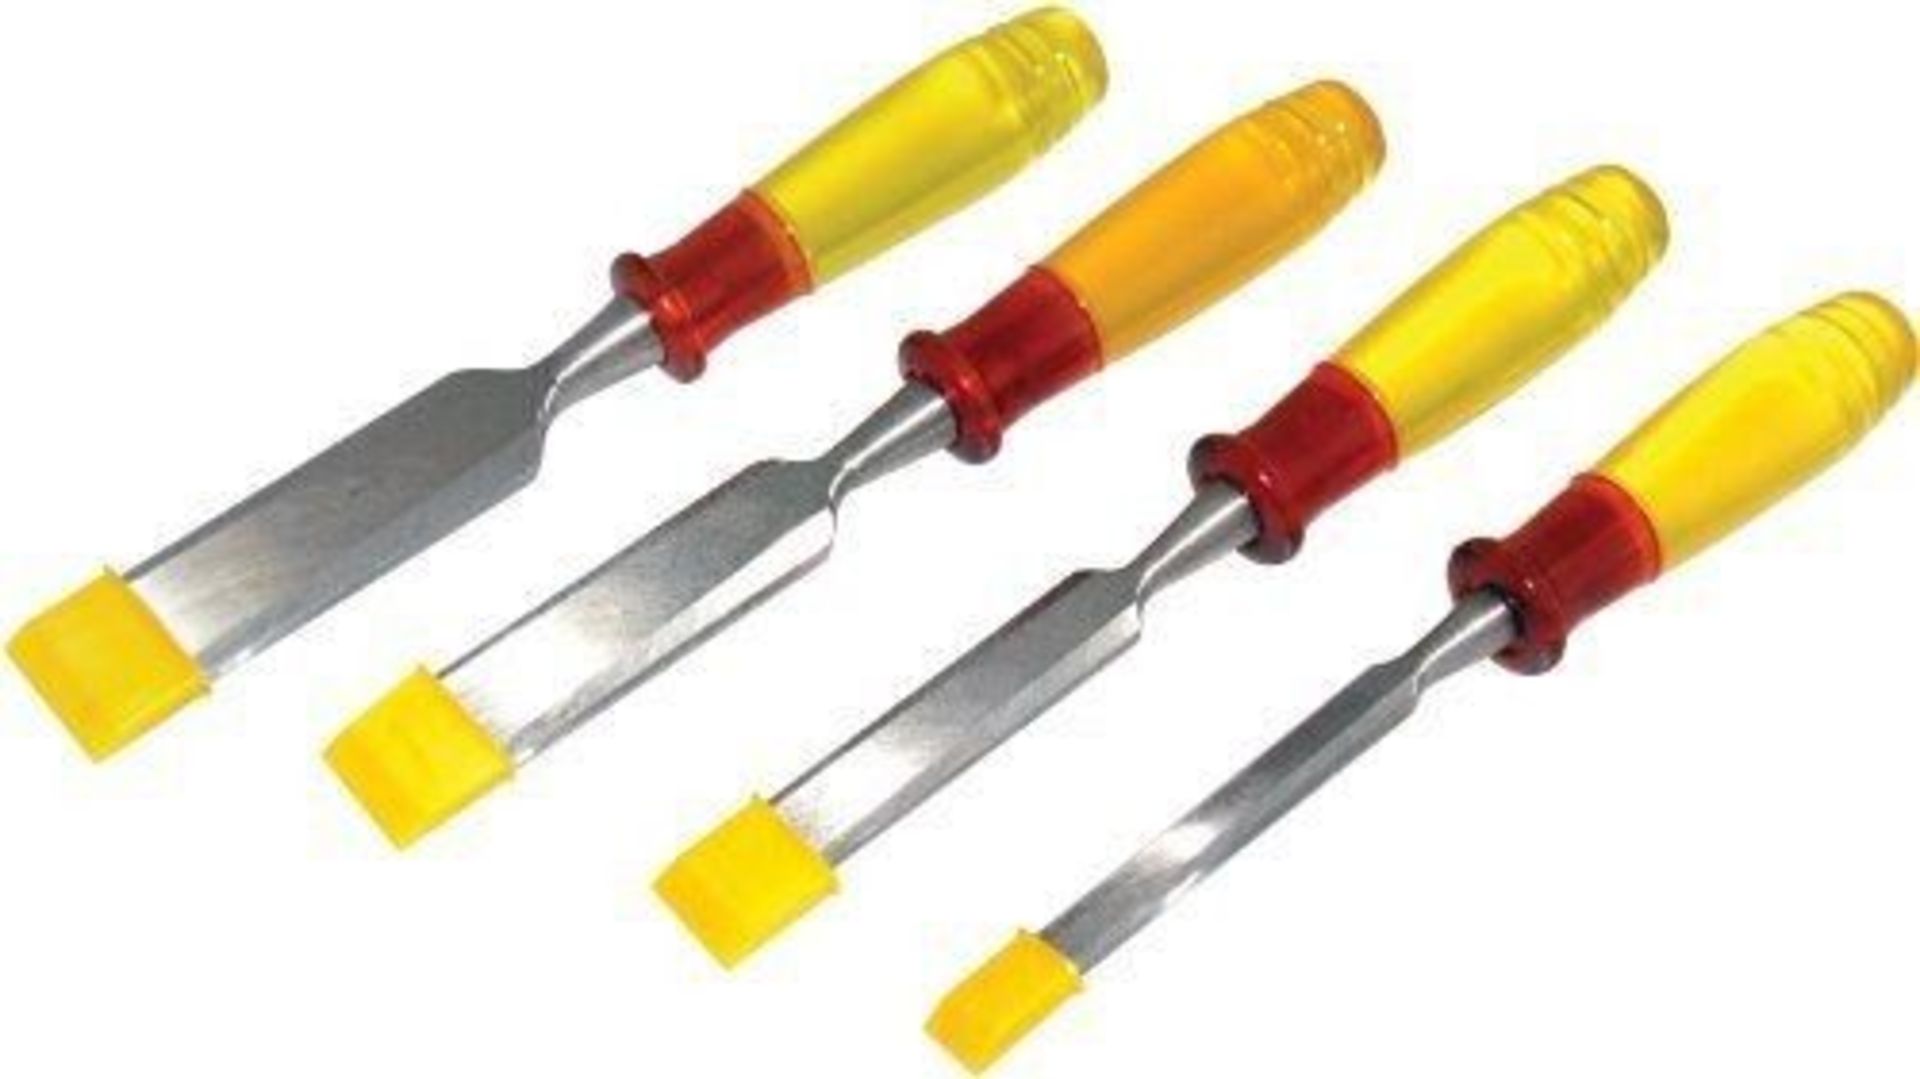 V *TRADE QTY* Brand New 4 Piece Deluxe Chisel Set With Bevel Edged Hardened Steel Blades, Hardened